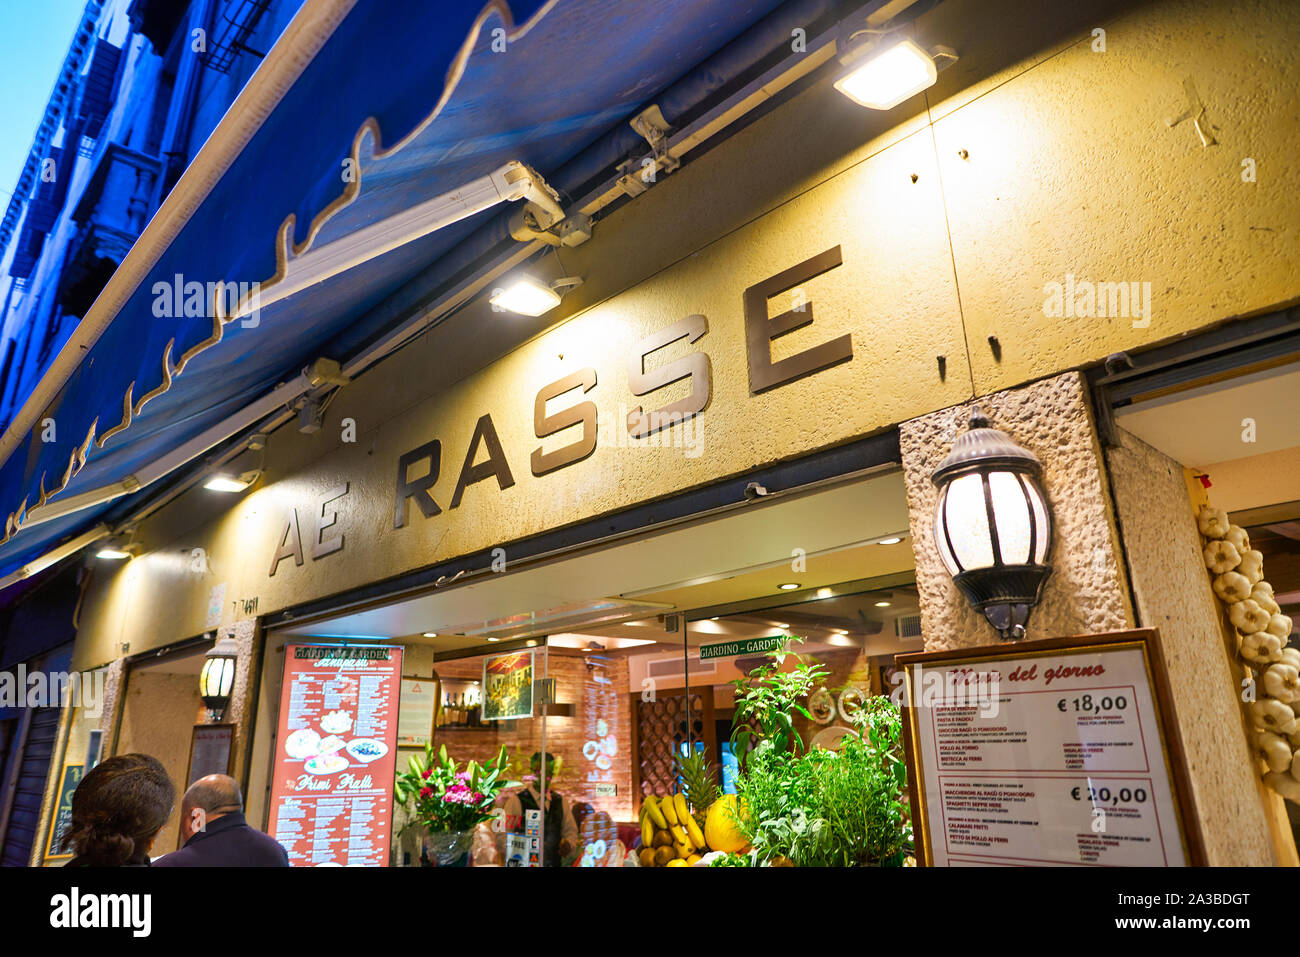 VENICE, ITALY - CIRCA MAY, 2019: Ae Rasse sign at a restaurant in Venice. Stock Photo